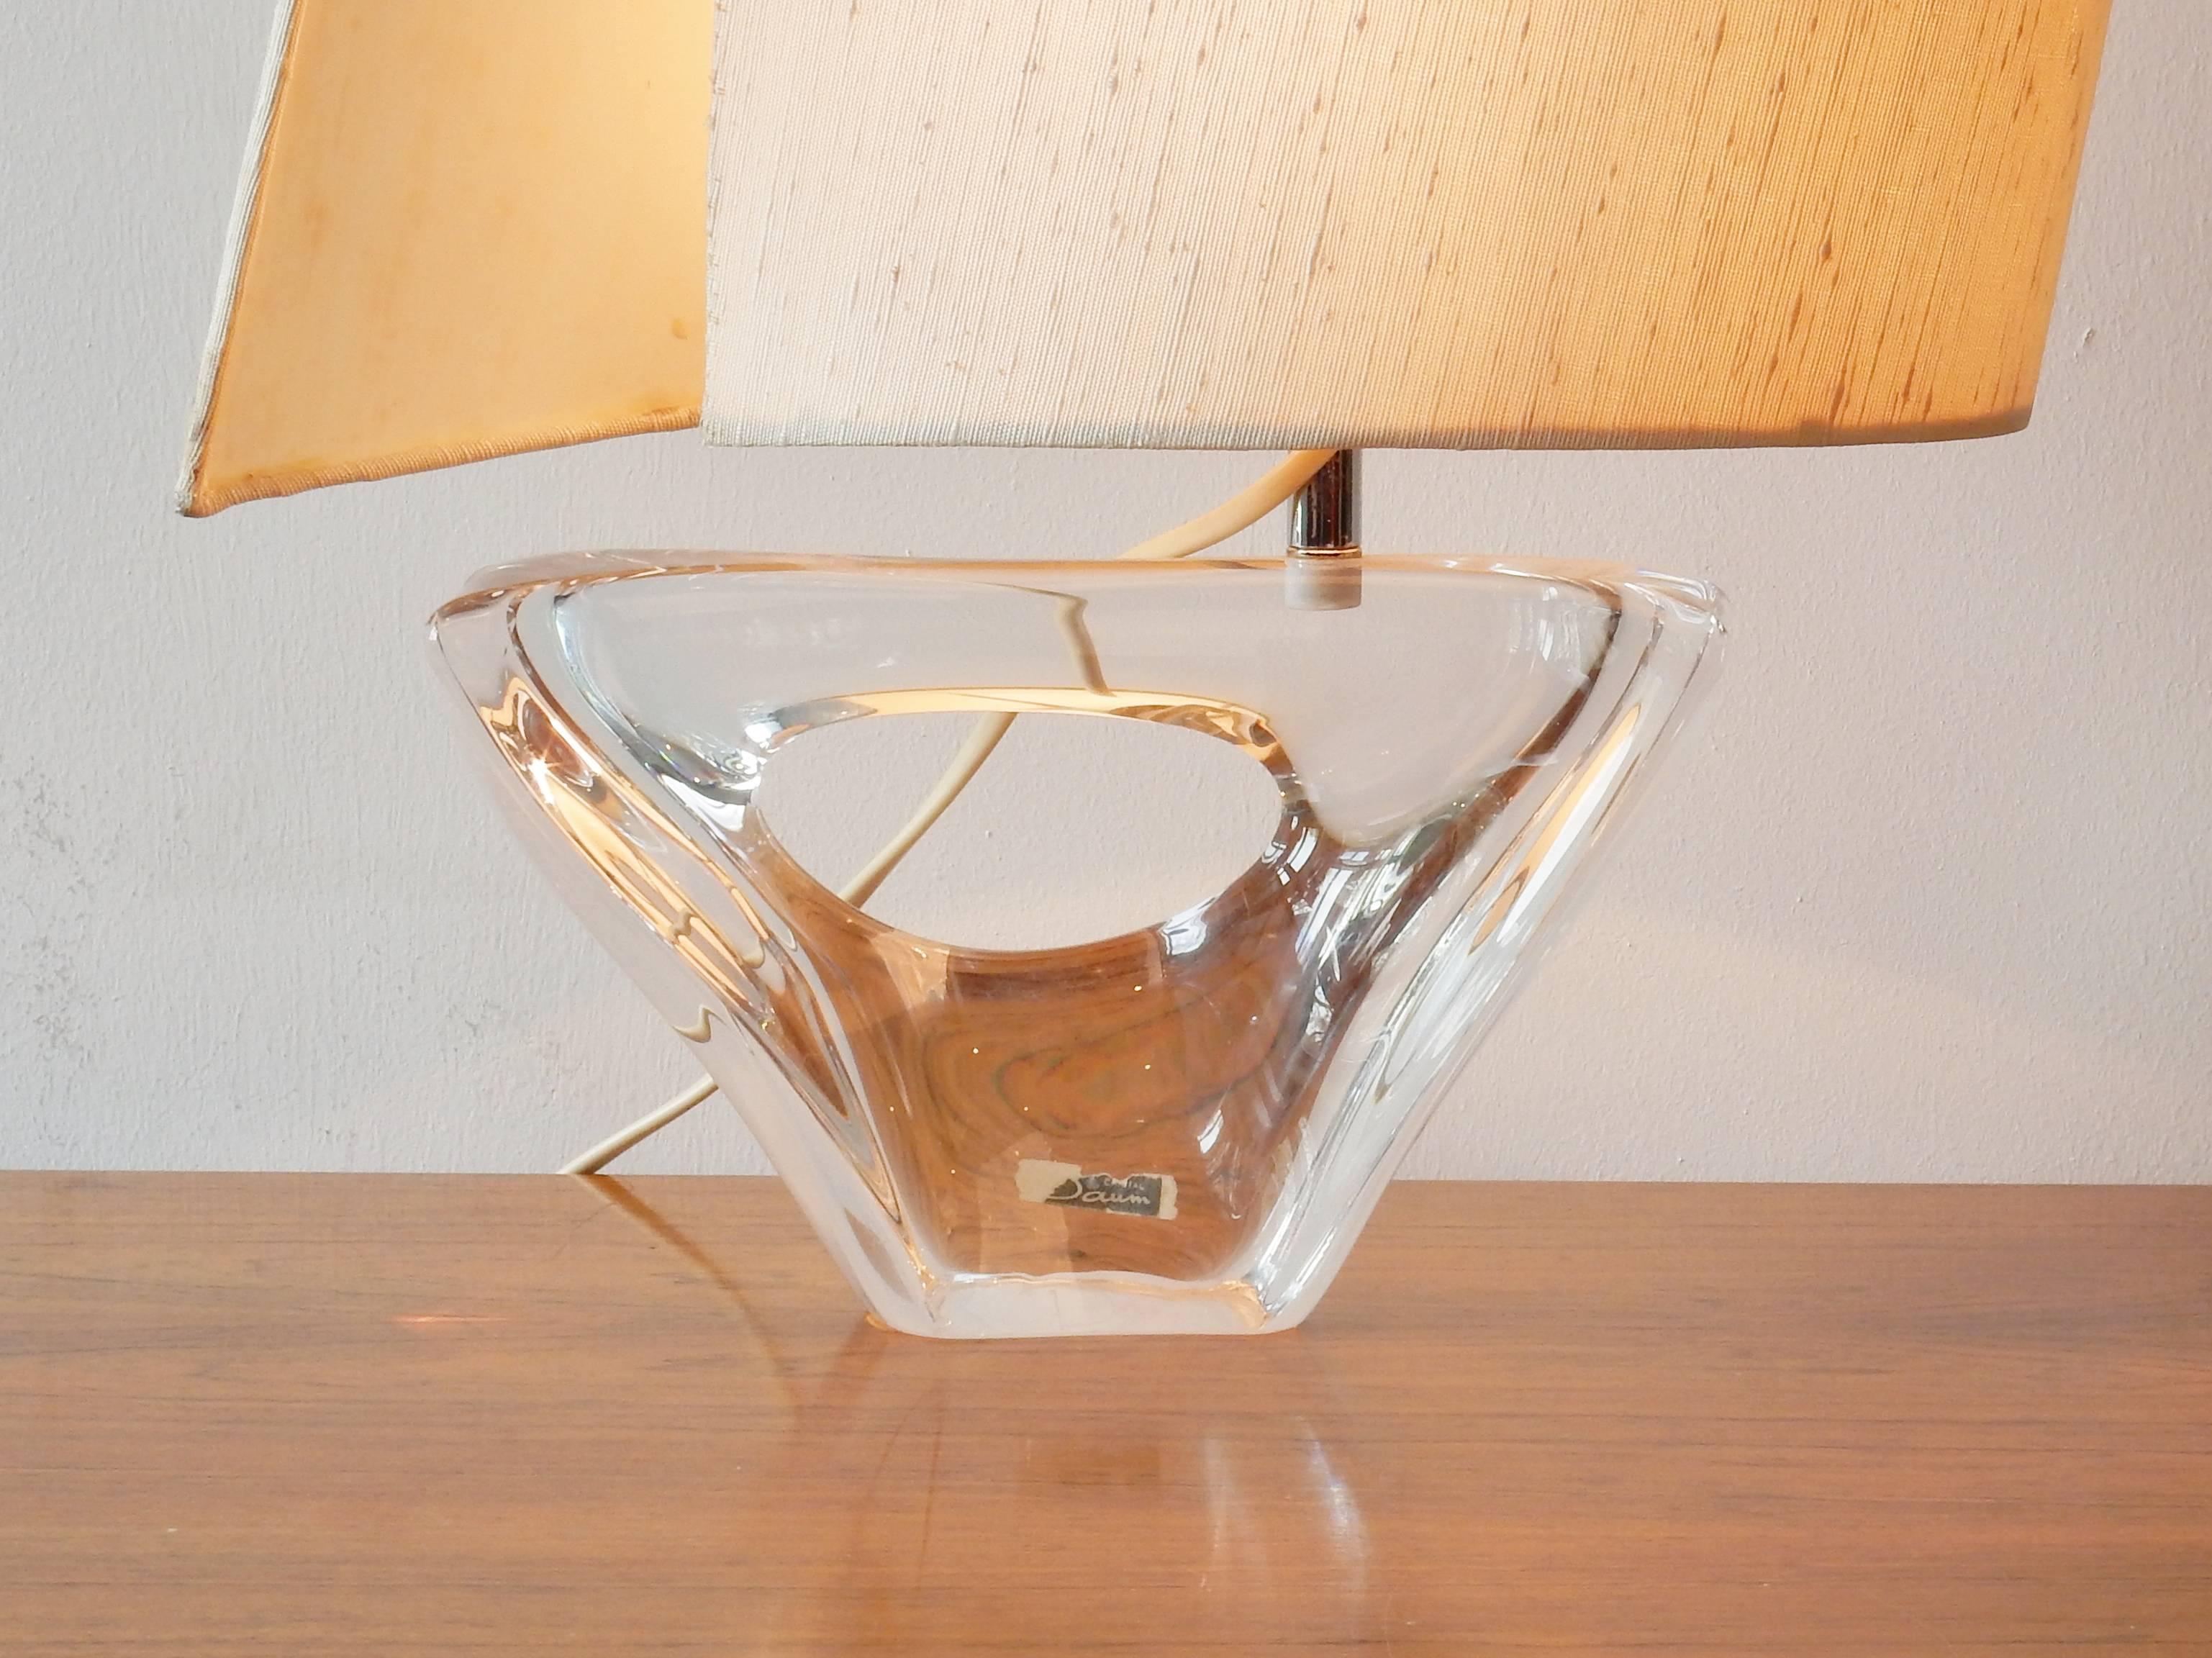 French Sailboat Shaped Table Light by Daum, Signed and Labelled, France, 1950s